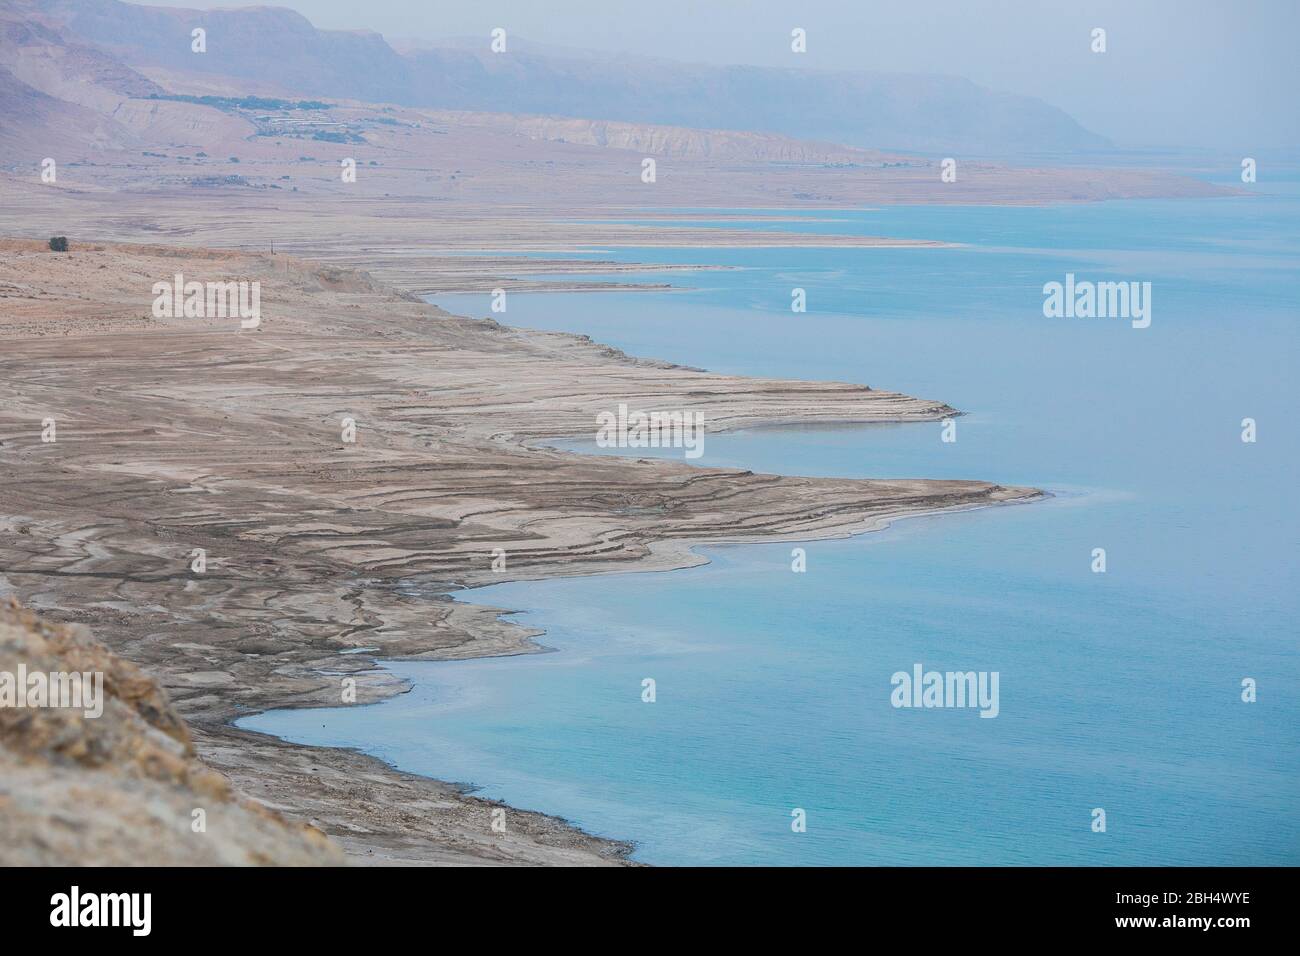 landscape of the Dead Sea, failures of the soil, illustrating an environmental catastrophe on the Dead Sea, Israel. Stock Photo